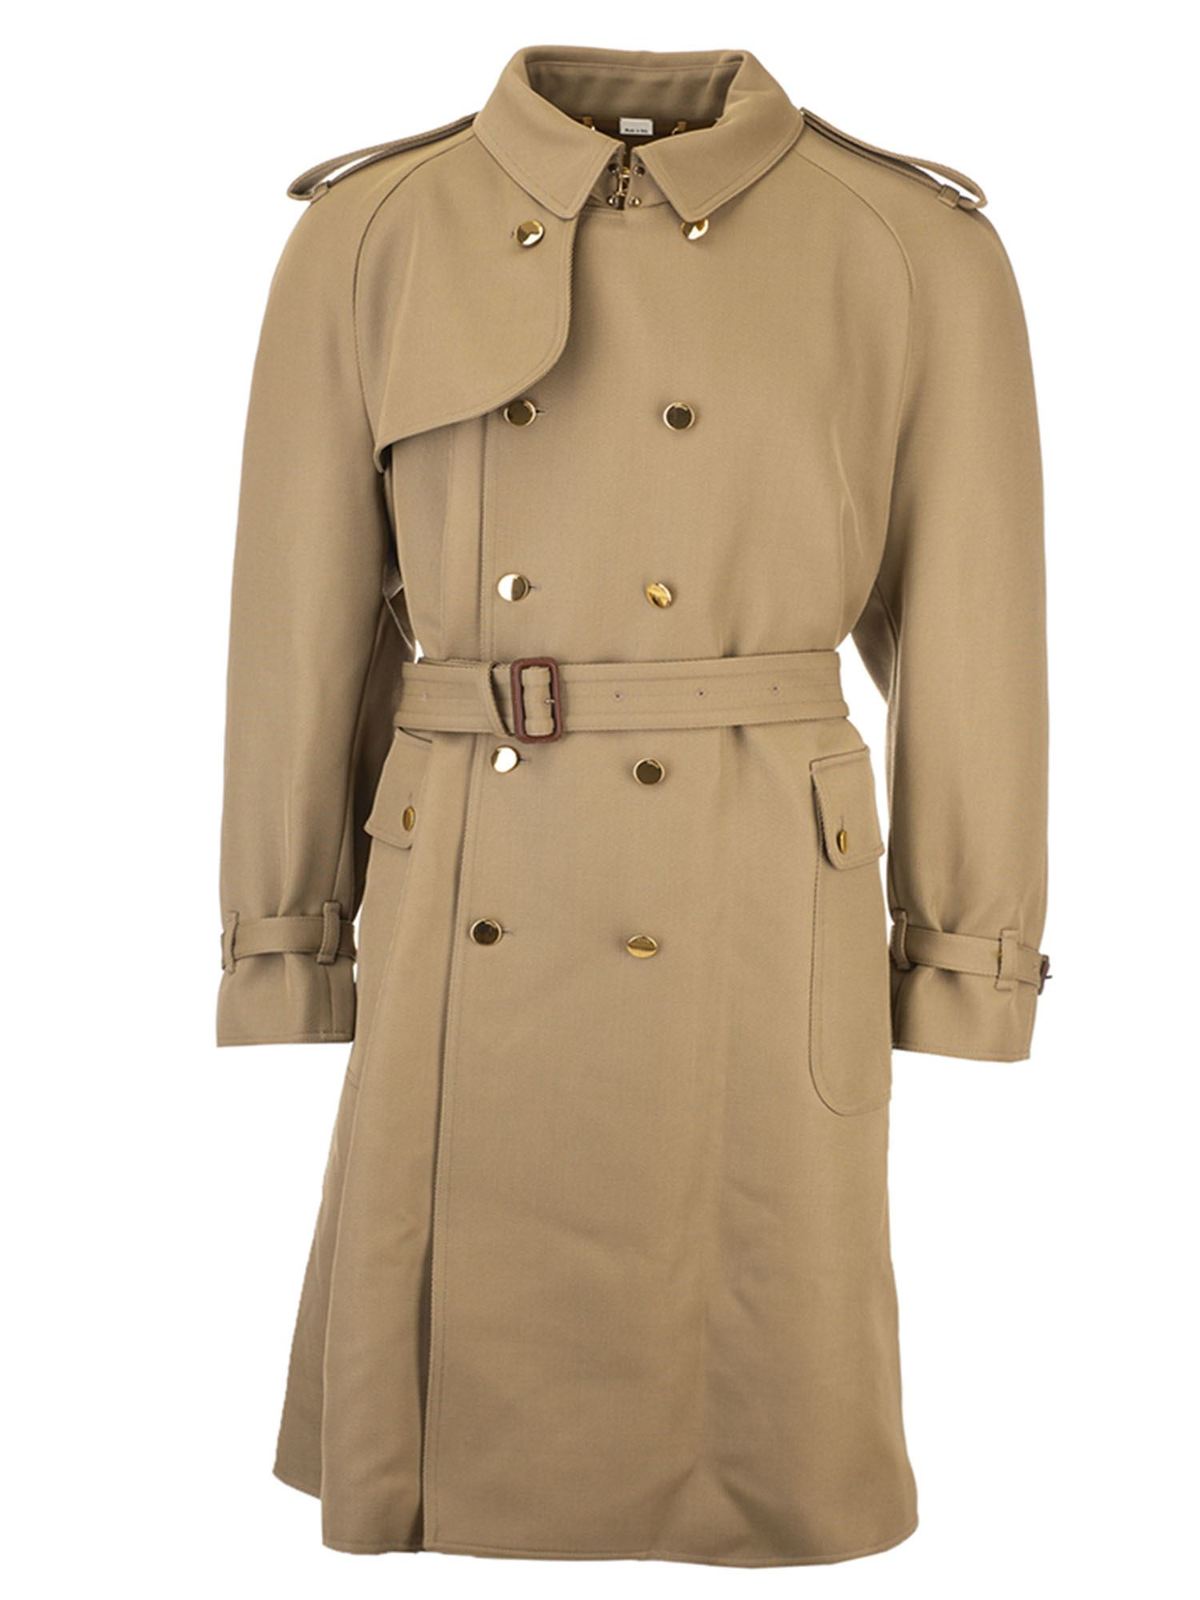 Trench coats Gucci - Gucci wool trench coat in camel color ...